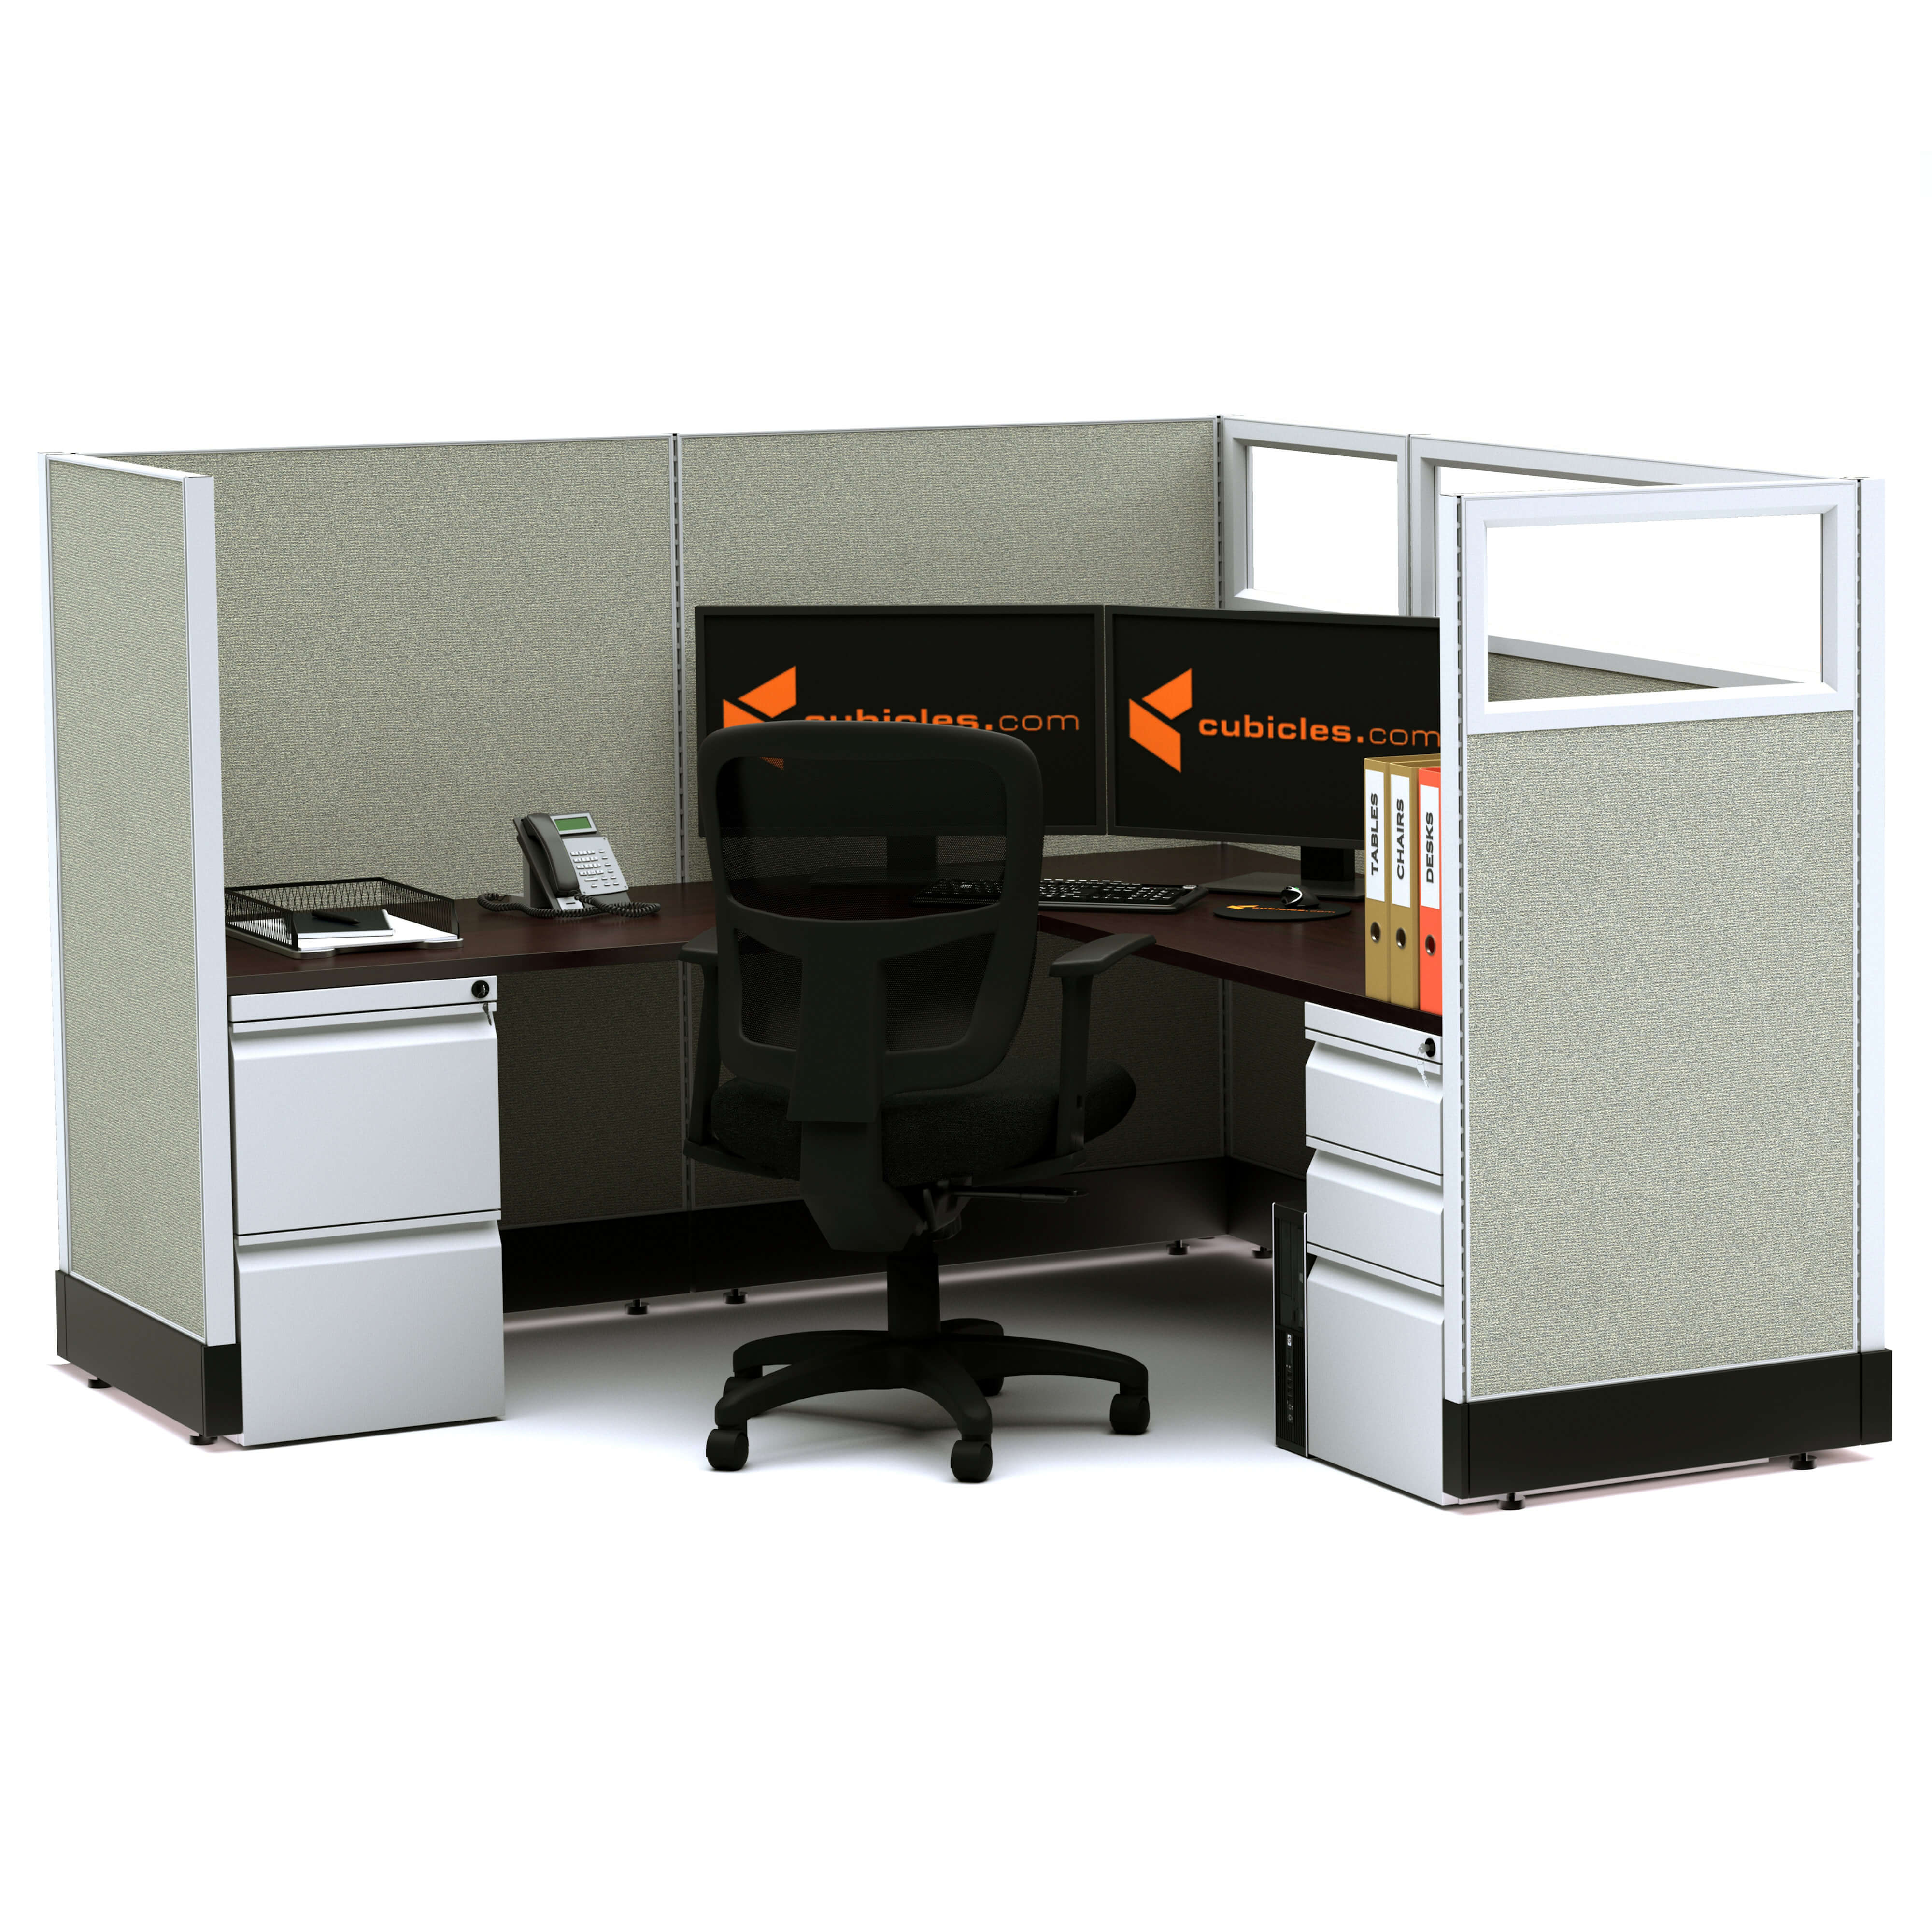 modular-office-furniture-partial-glass-office-cubicles-53h-single-non-powered.jpg